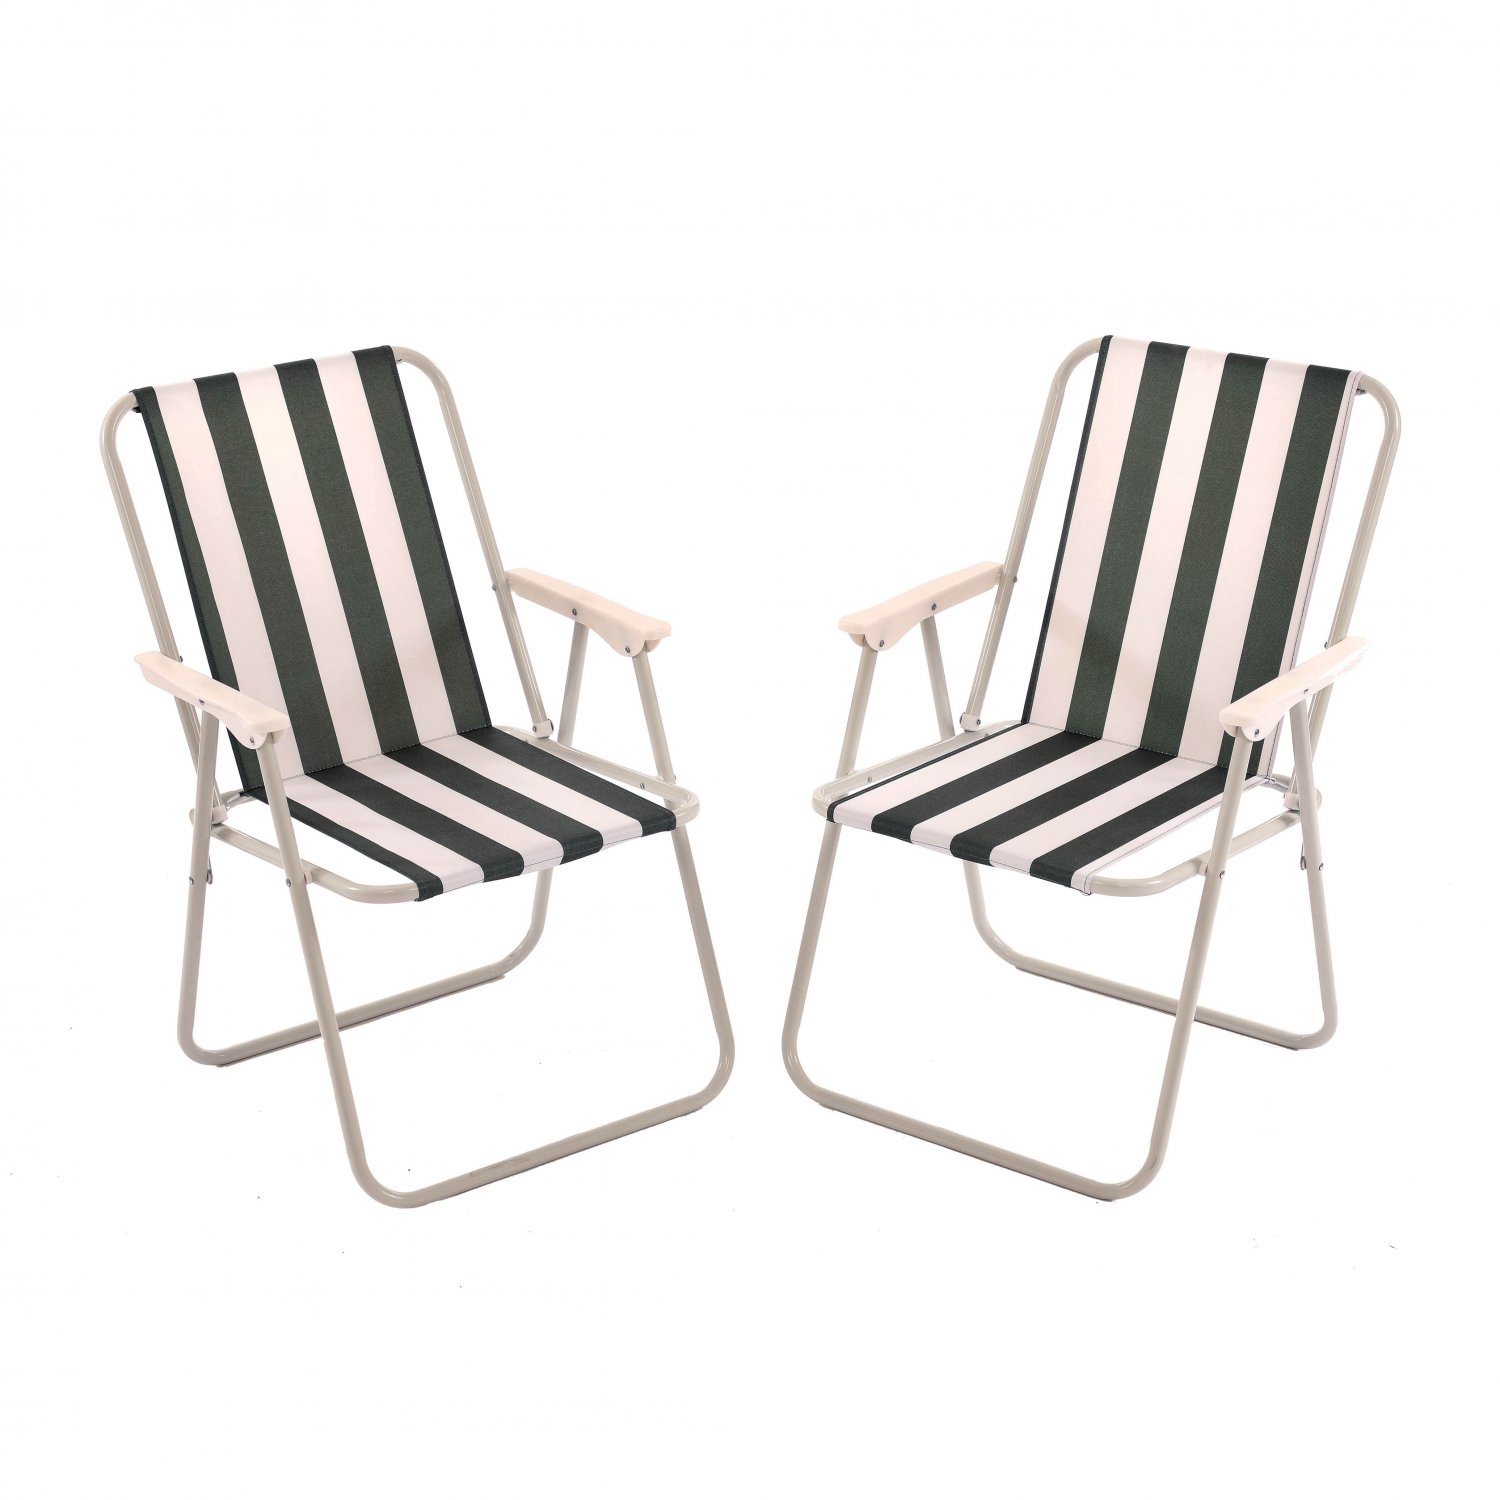 2x Stripey Camping Festival Party Folding Outdoor Chairs with Ar